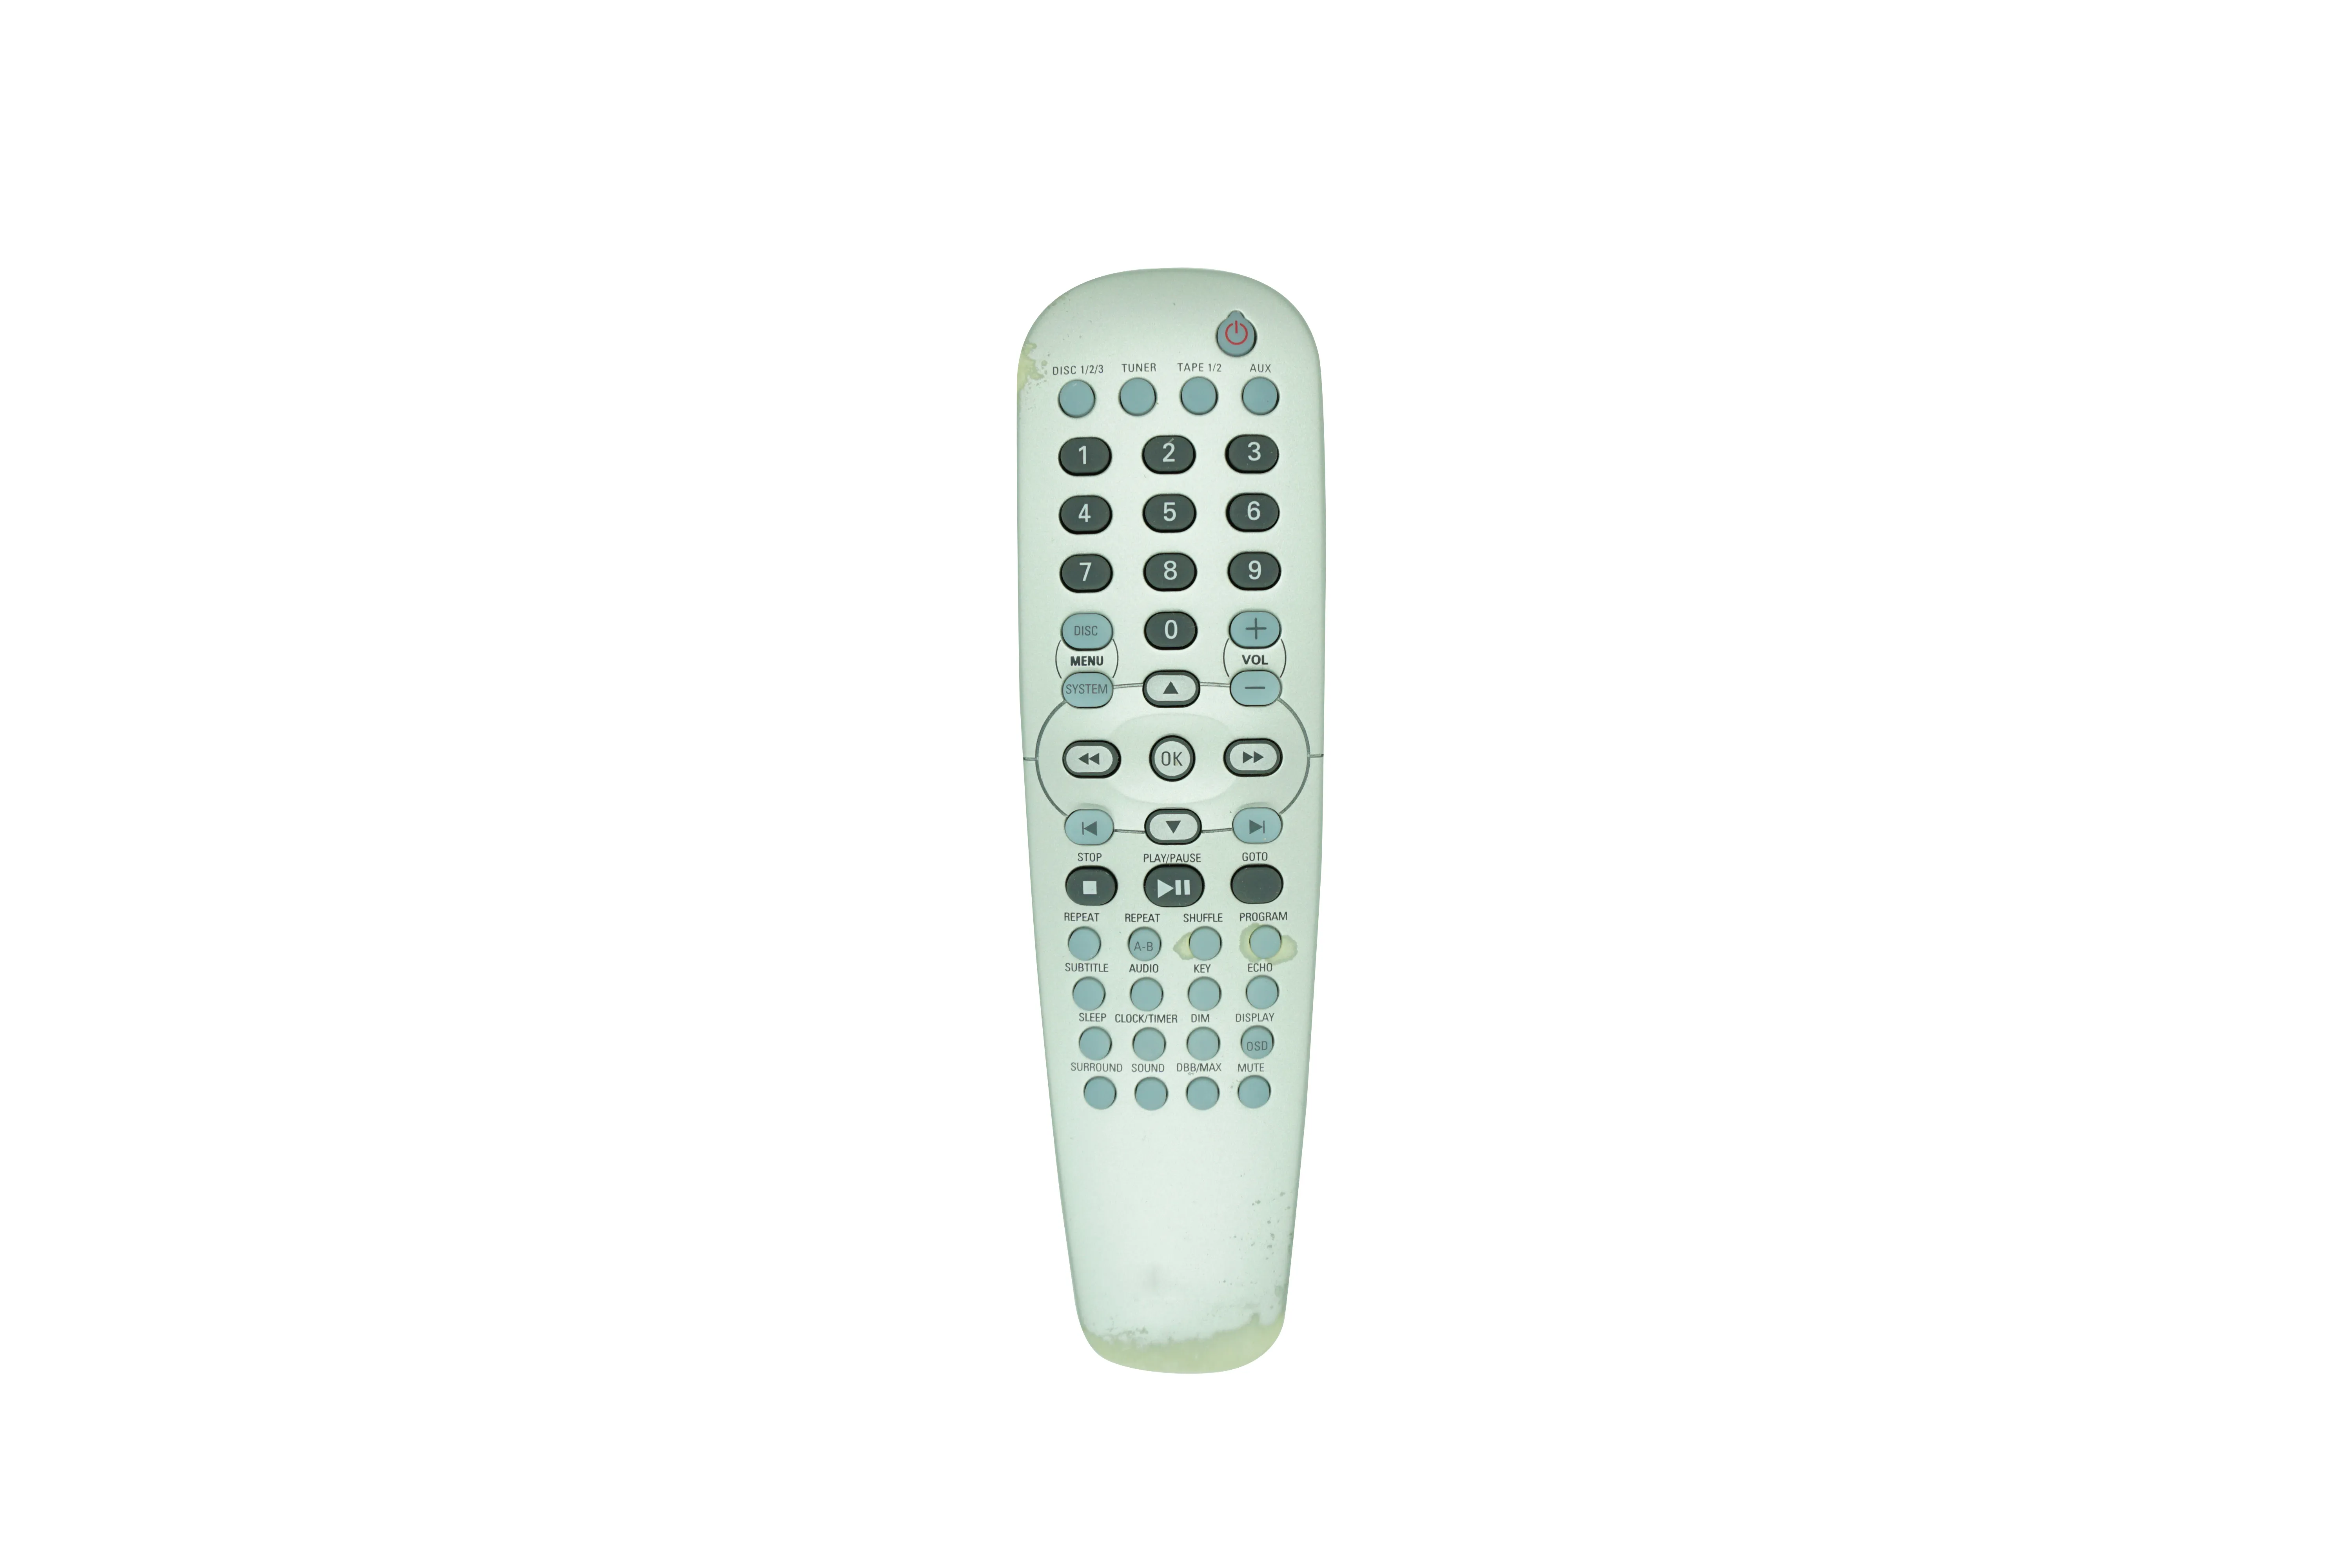 Remote Control For Philips FWD798 FWD798/37B FWD798/37 FWD798/55 FWD798/98 FWD792 FWD792/98 FWD790/21 FWD790/21M FWD796/21 FWD796/21M DVD Mini Hi-Fi Stereo Audio System